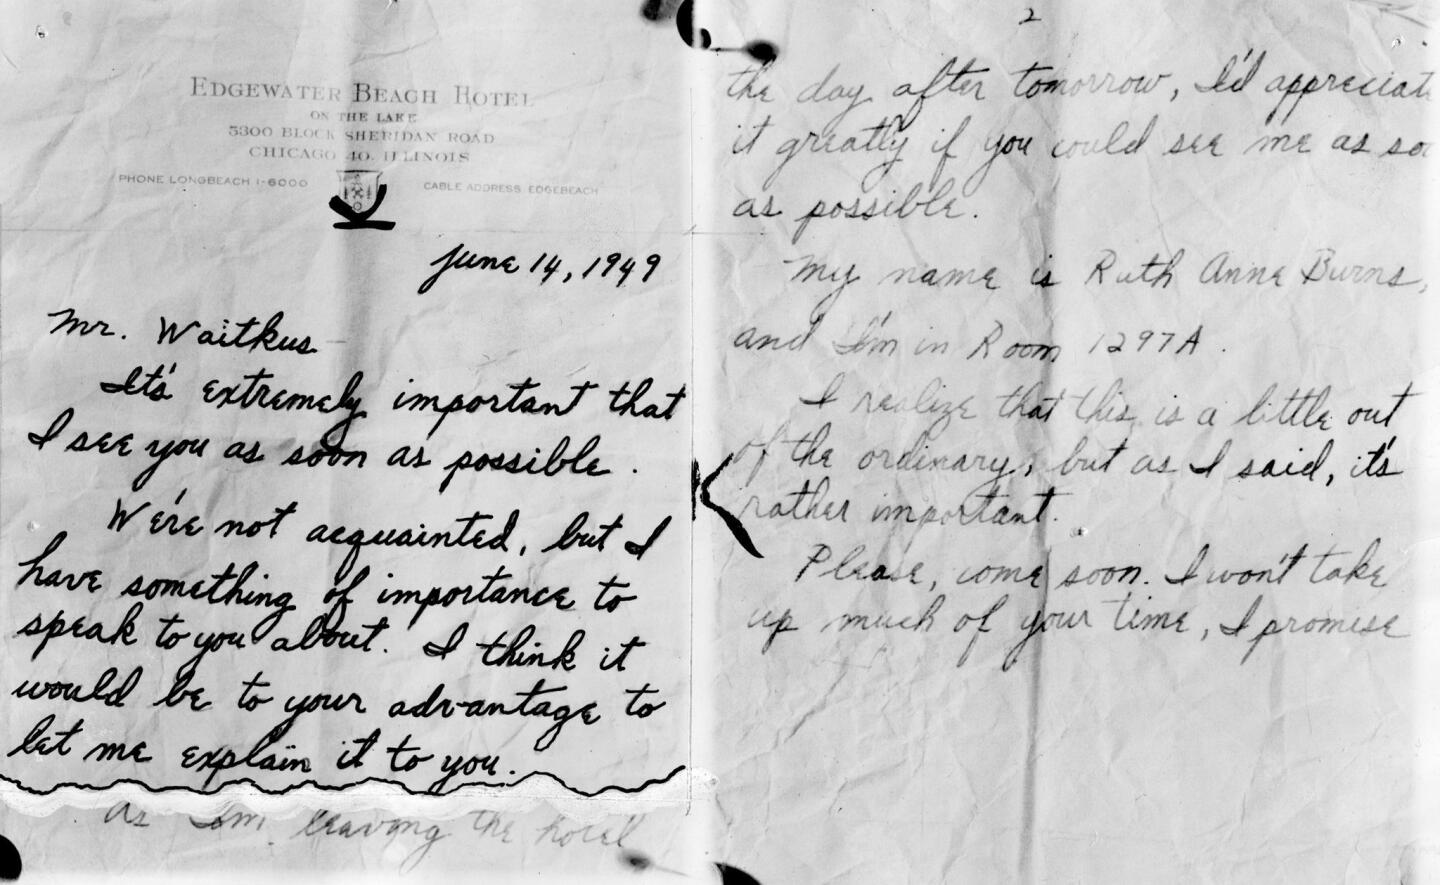 The note Ruth Steinhagen, 19, wrote to lure baseball player Eddie Waitkus to her hotel room, where she then shot him. The note was delivered to Waitkus by a bellboy.